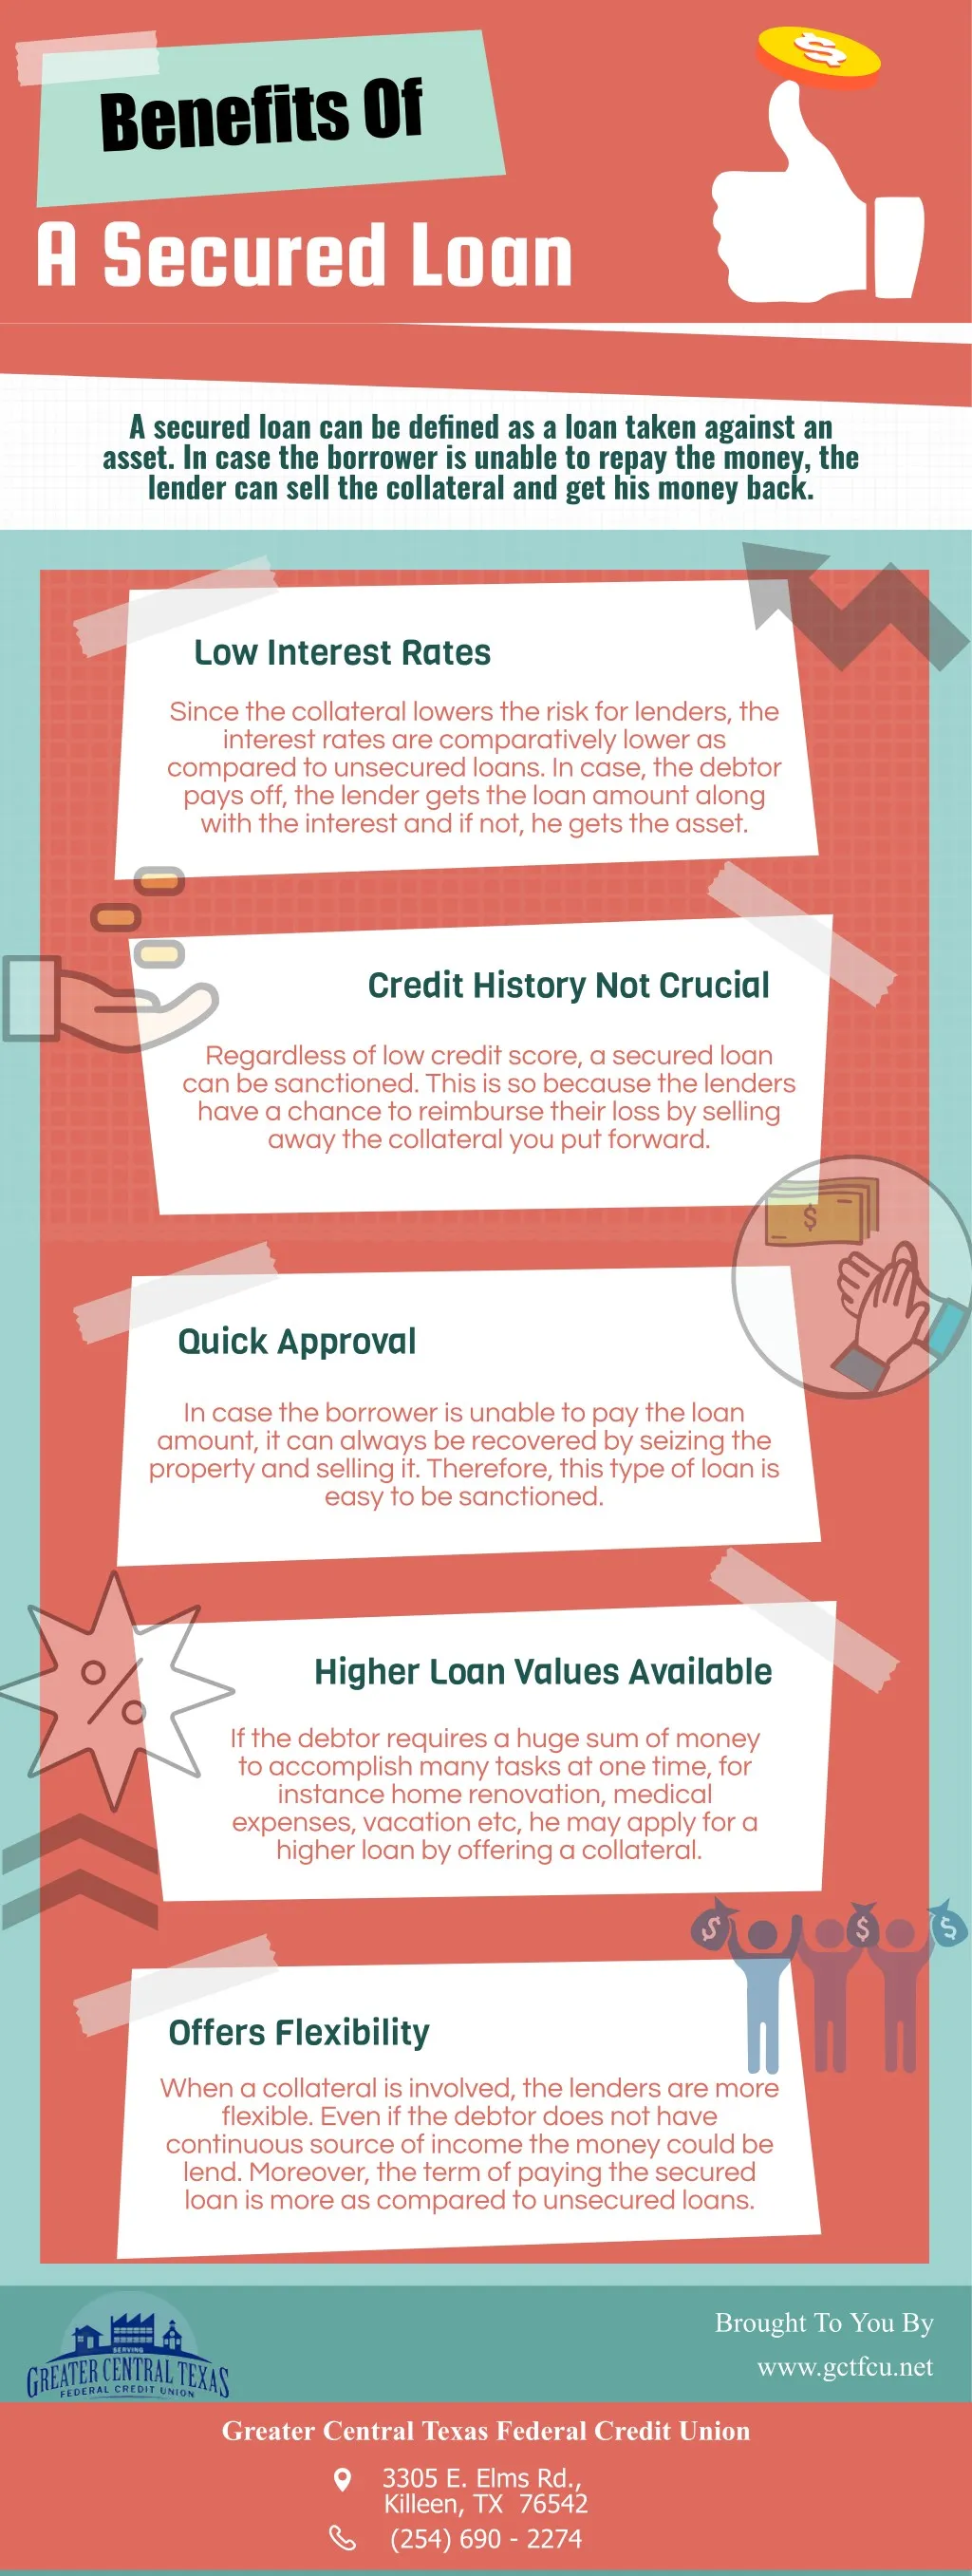 benefits of a secured loan